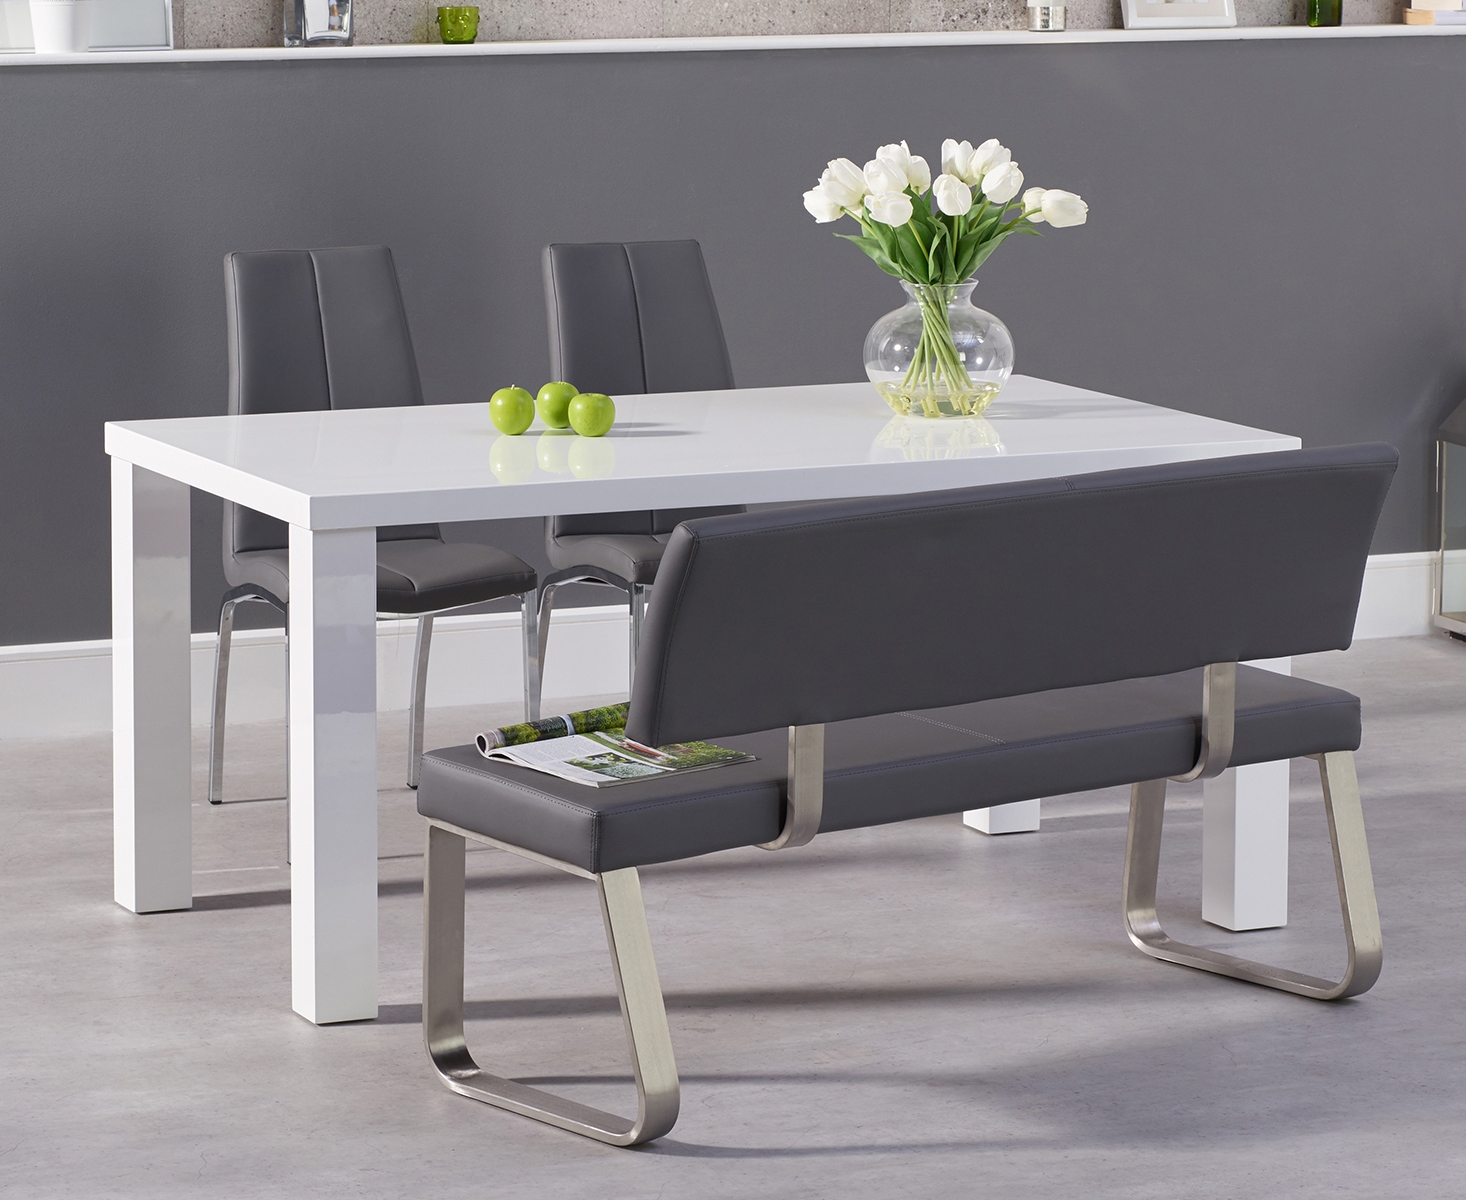 Photo 1 of Seattle 160cm white high gloss dining table with 4 grey marco chairs with 1 grey bench